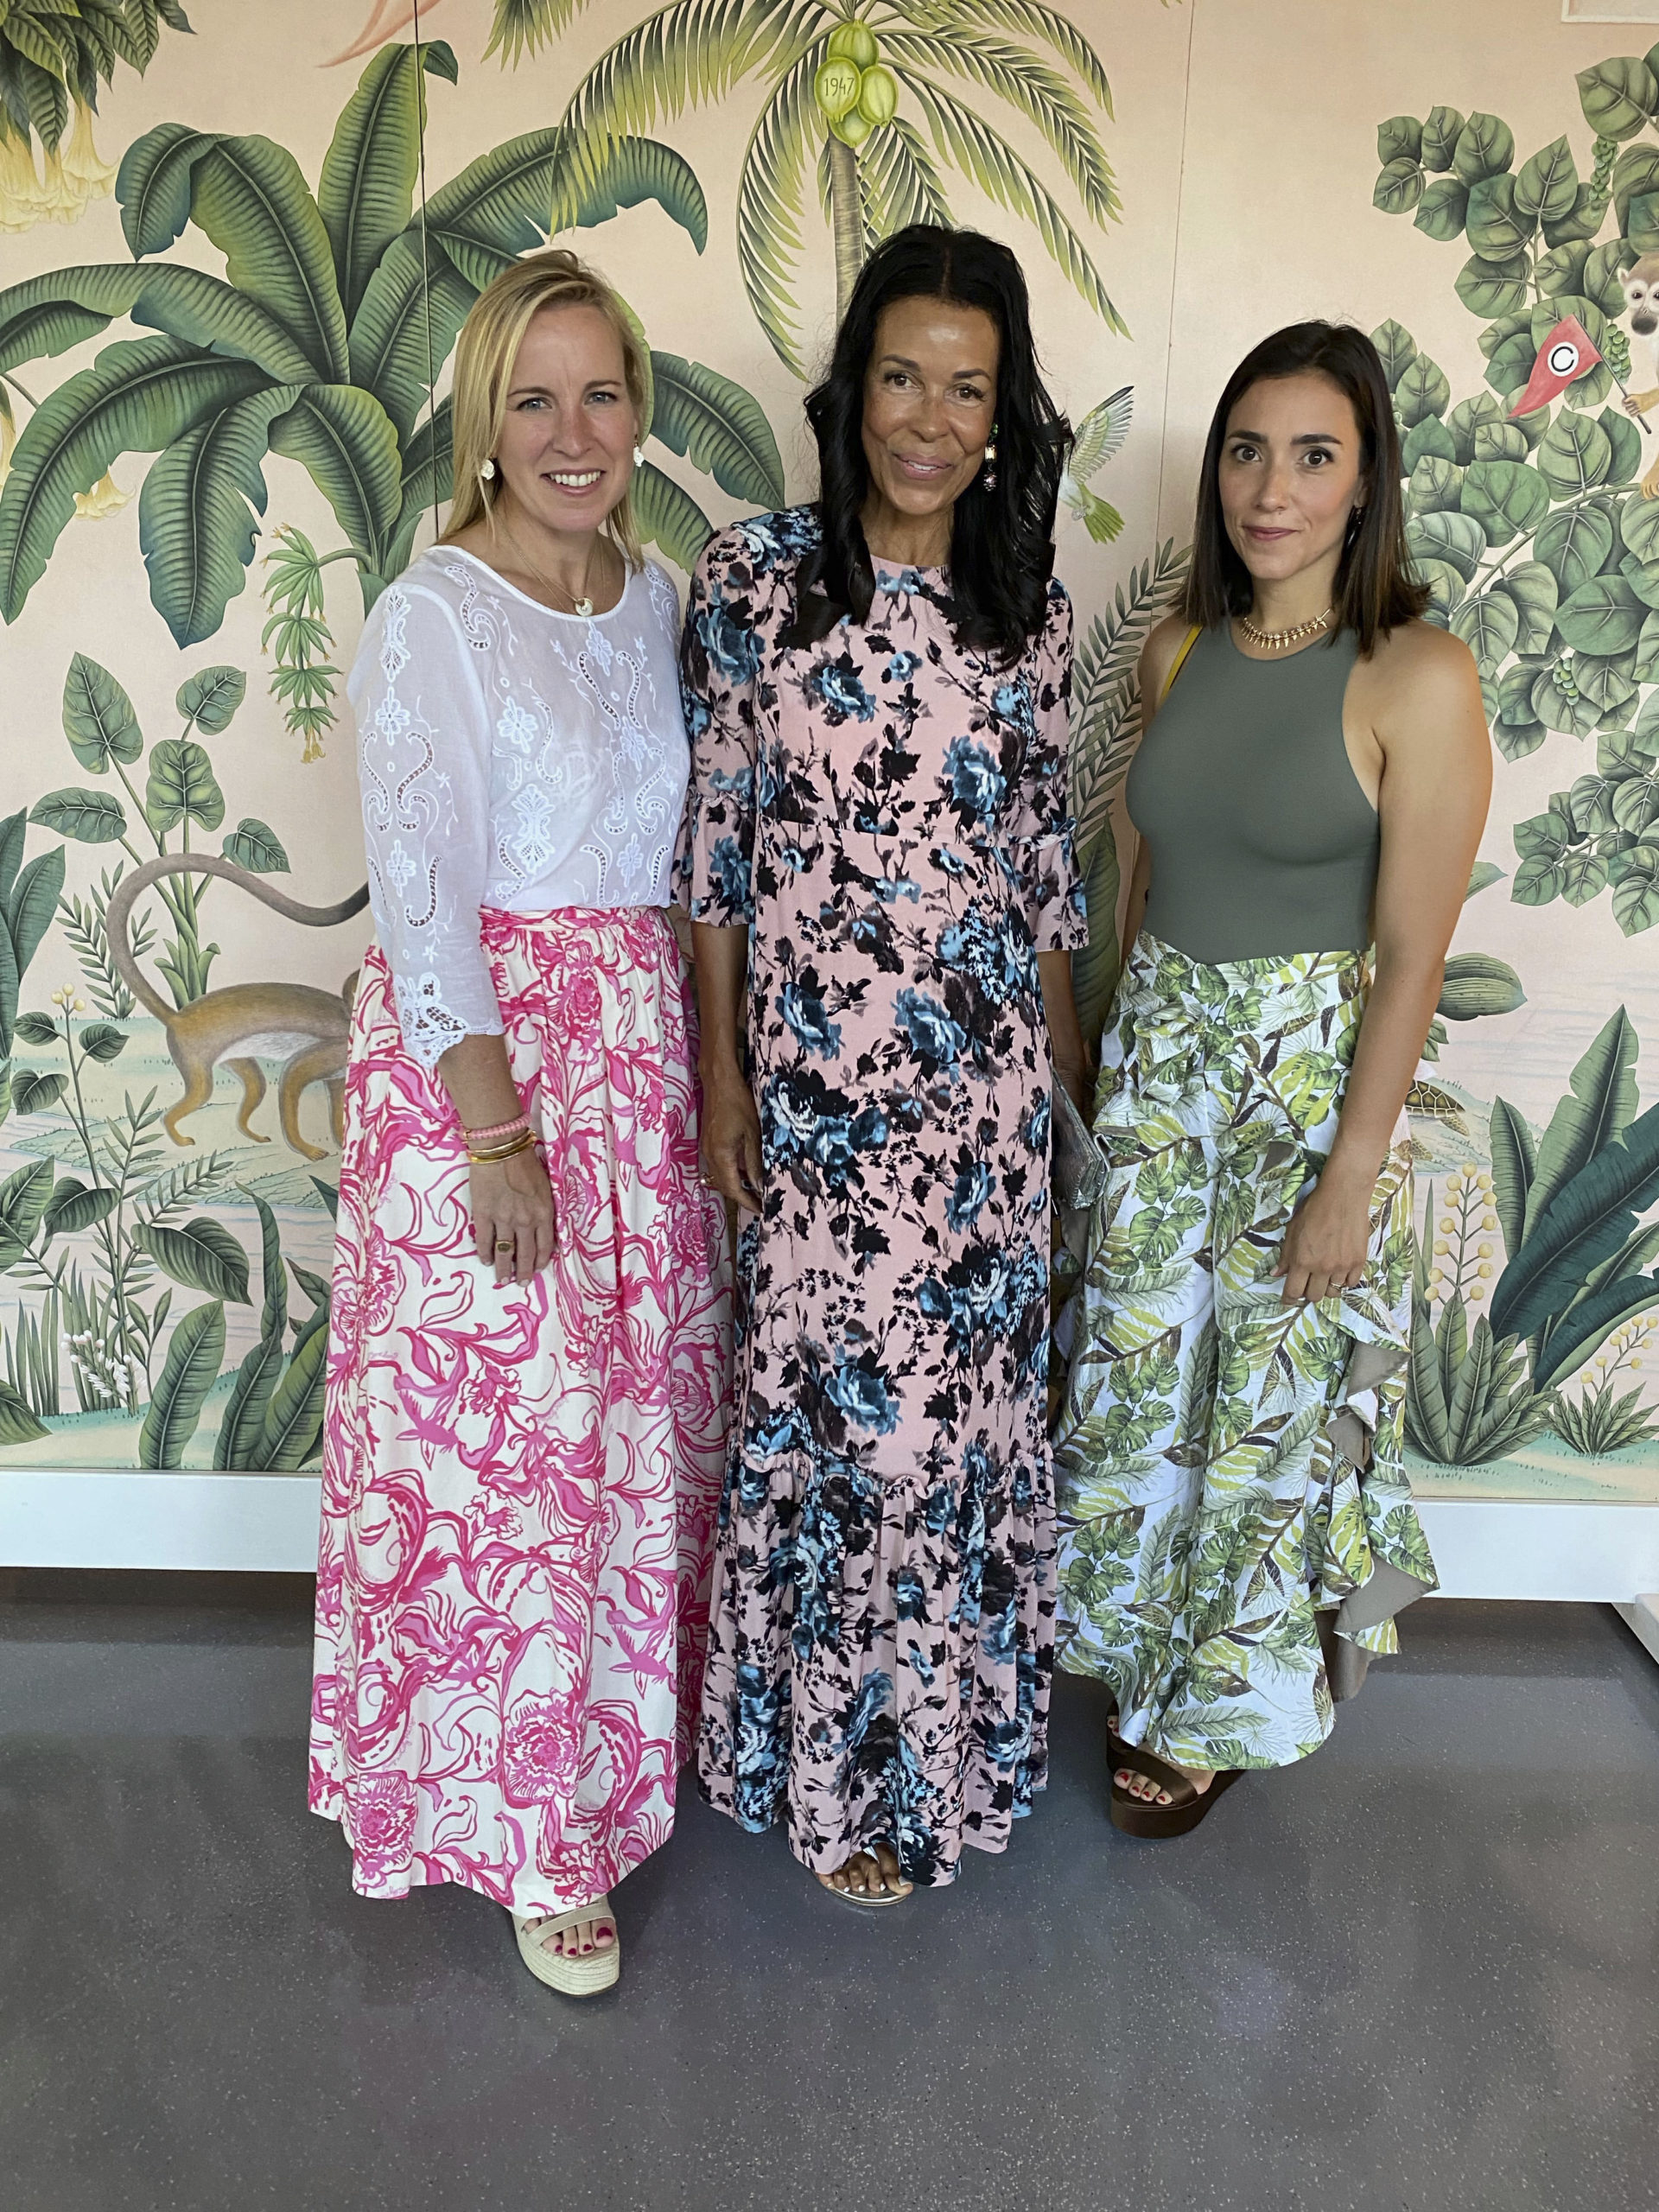 Bonnie Brennan, Kim Heirston and Ana Maria Celis at The Colony Pop-Up at Christie's.